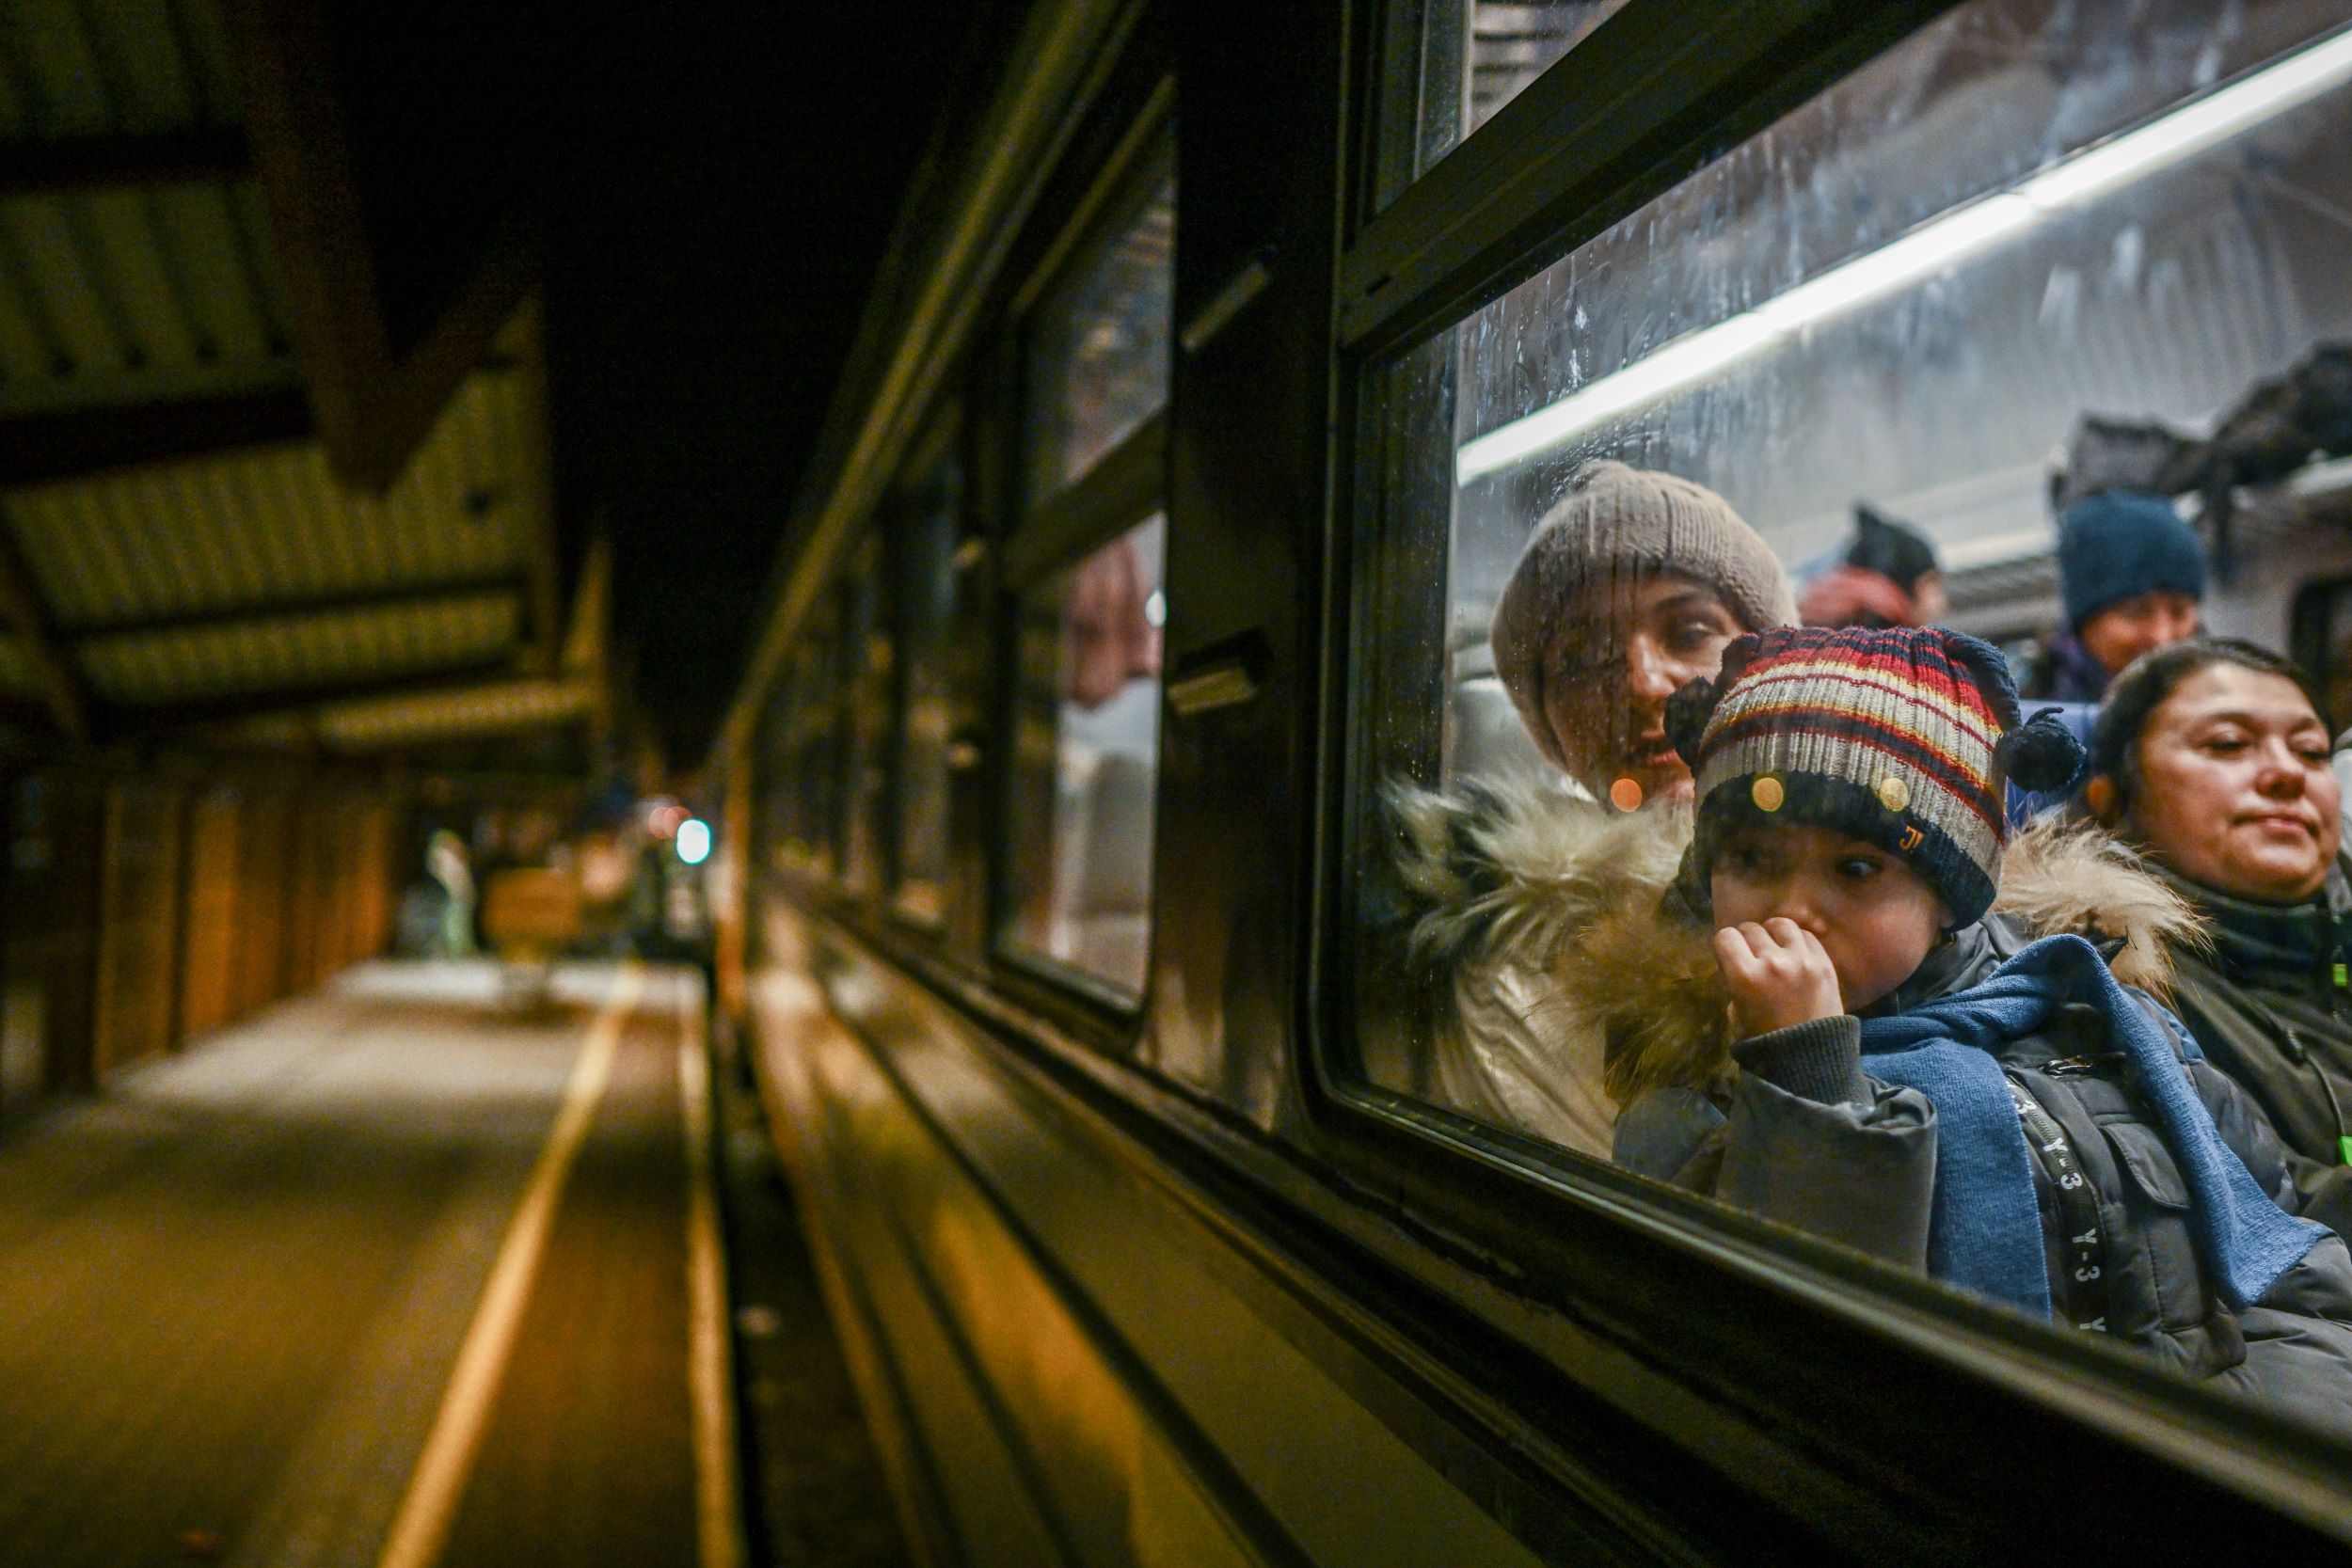 A woman and a child wait for a call to cross the passport control after arriving in a train from Kyiv at the Przemysl main train station on February 27, 2022 in Przemysl, Poland. [Omar Marques/Getty Images]